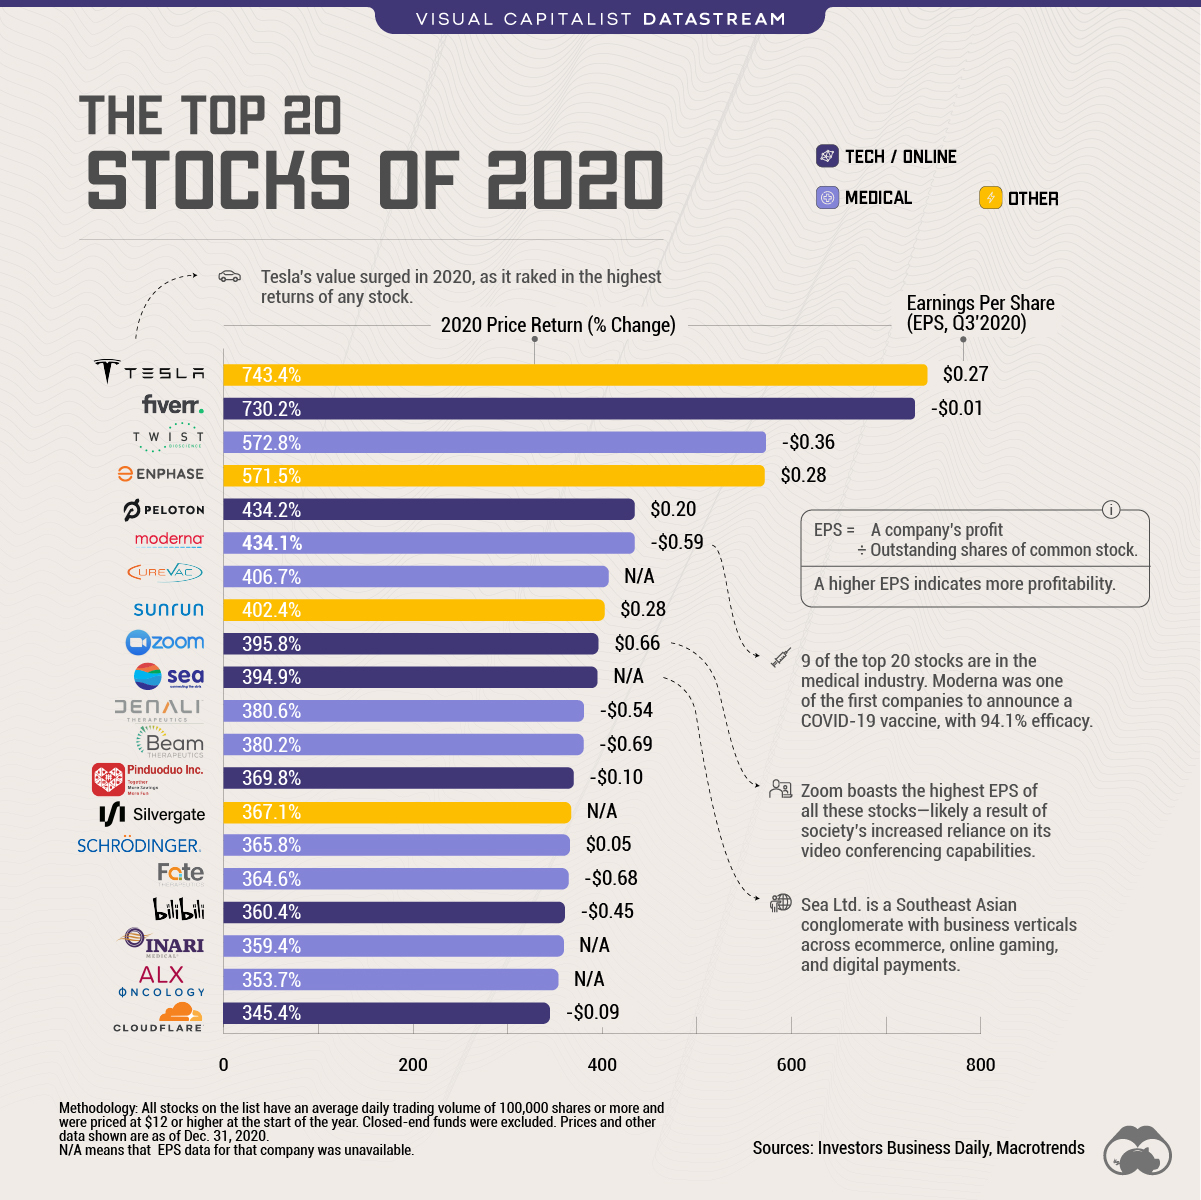 The 20 Top Stocks of 2020